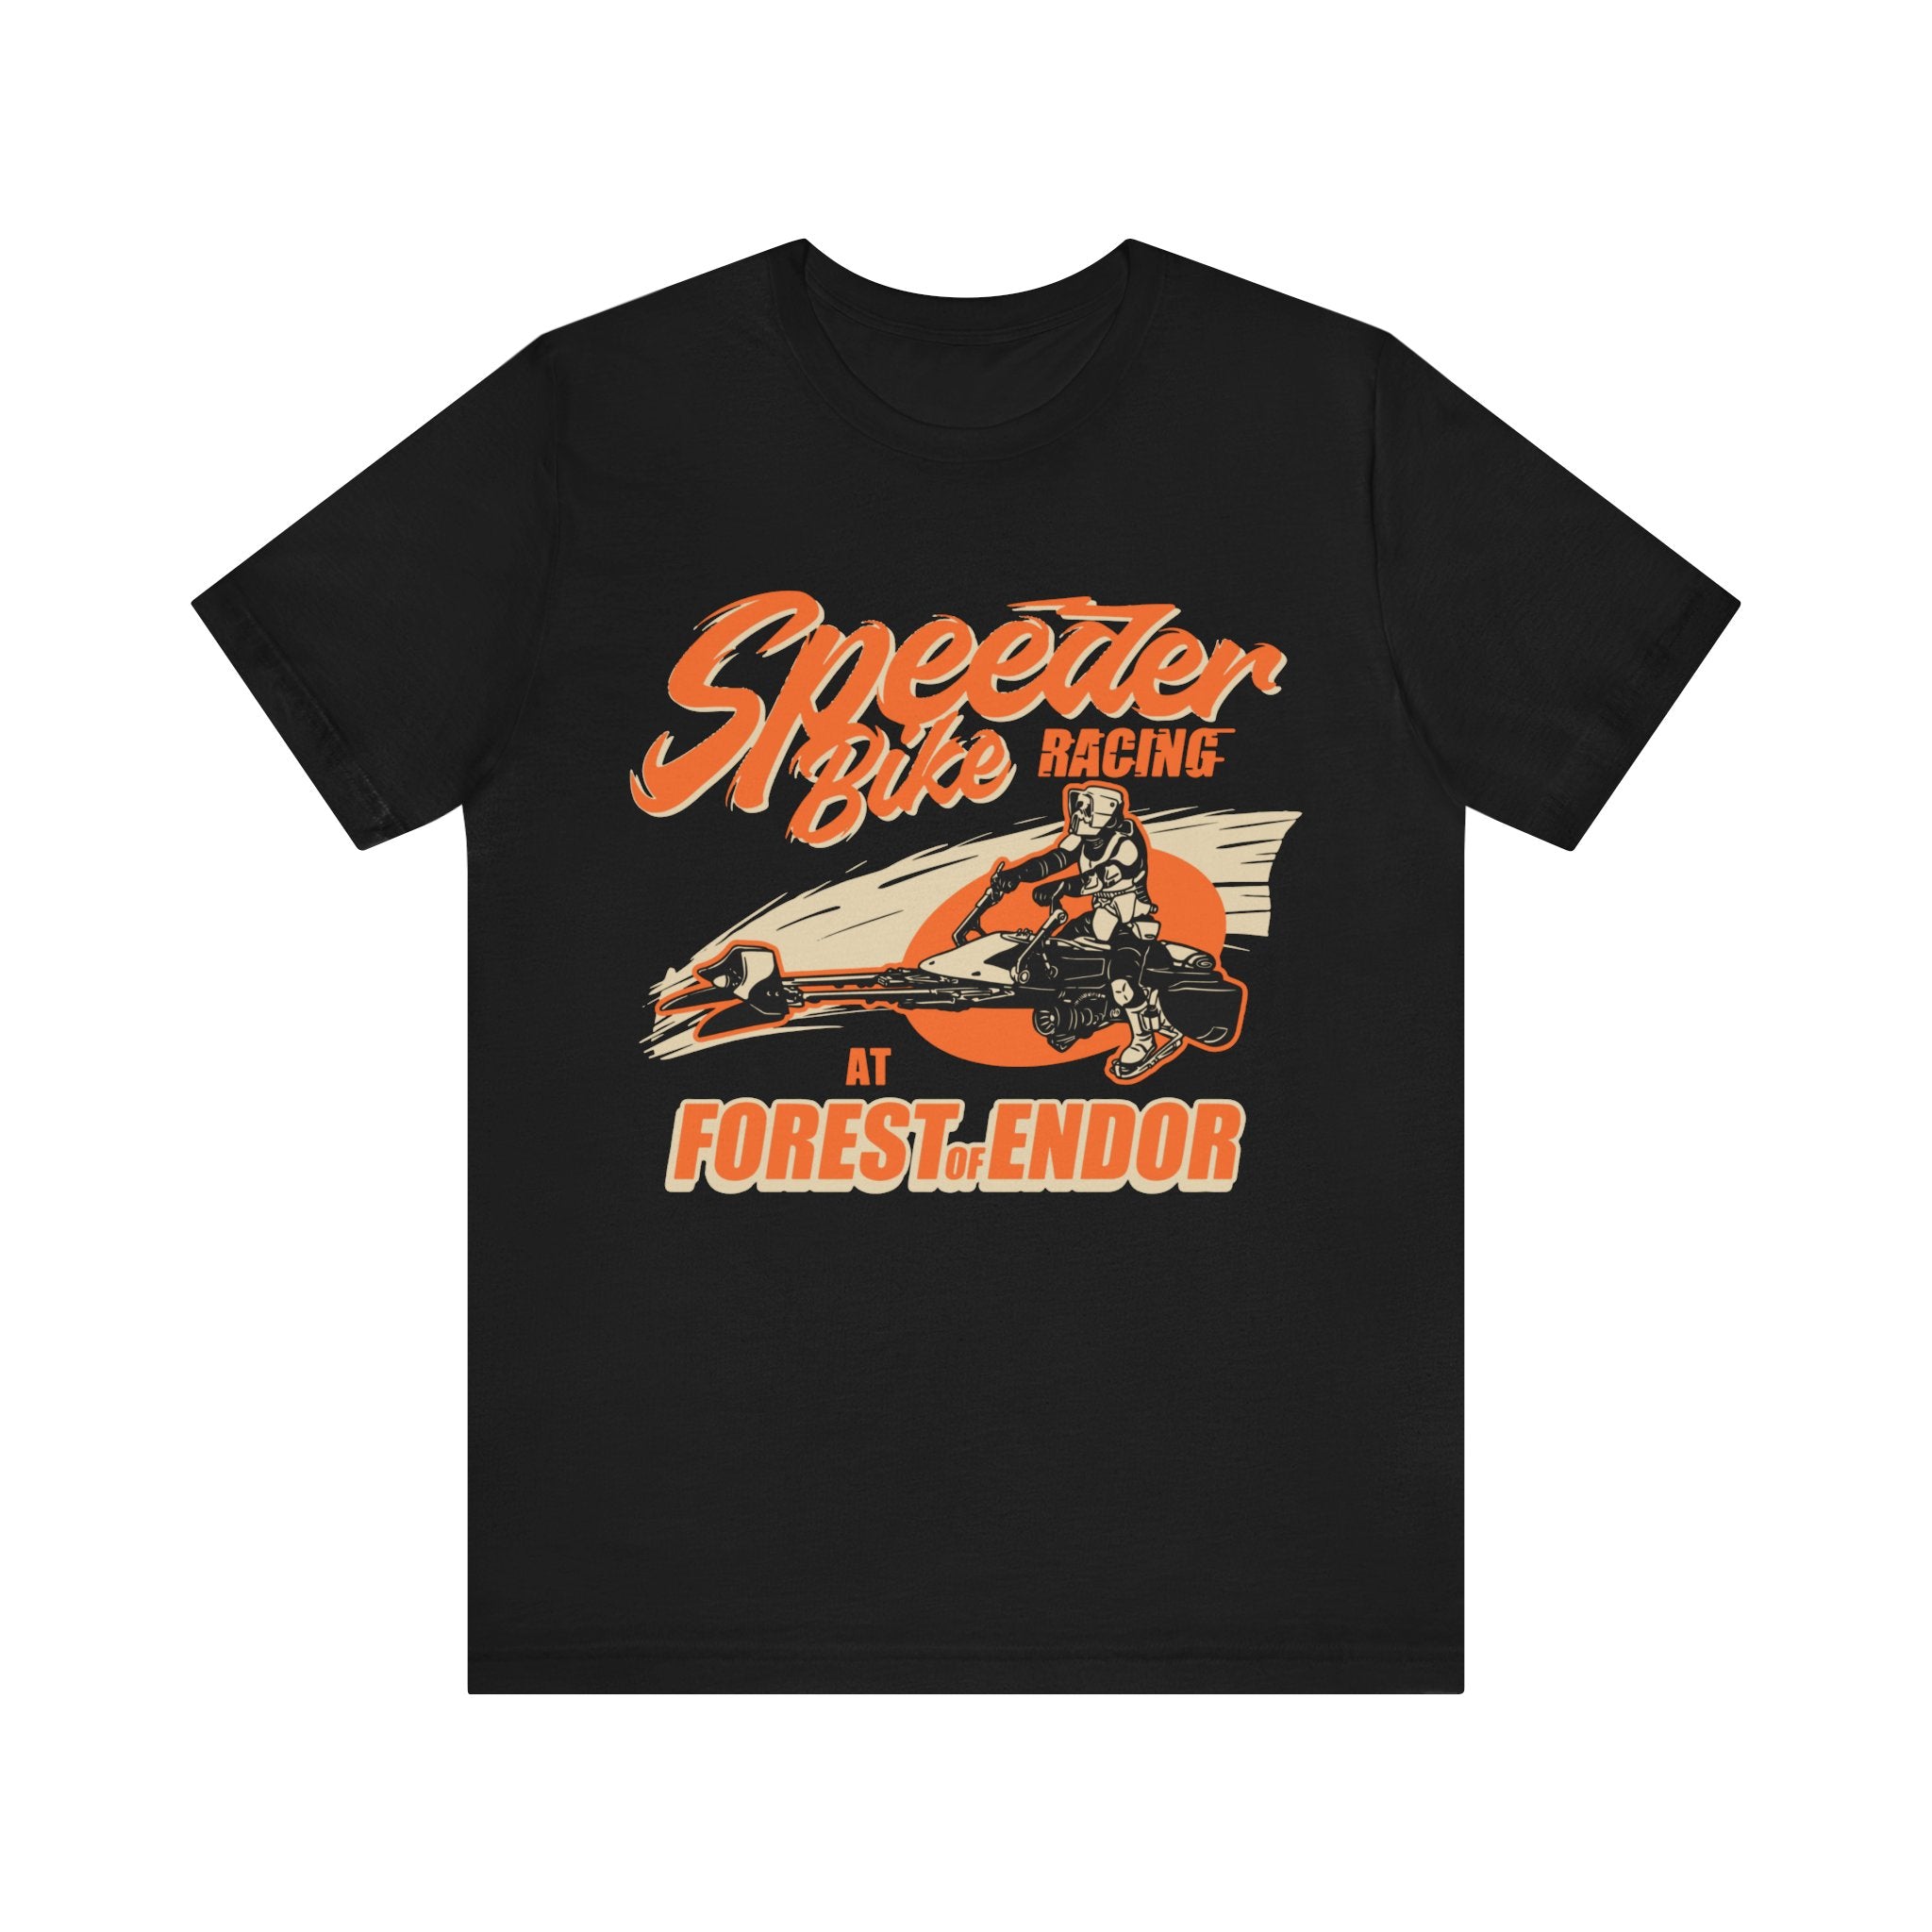 Black jersey tee with orange and white graphic of a motorbike racer and the text "Speeder Bike Racing at Forest Endor.